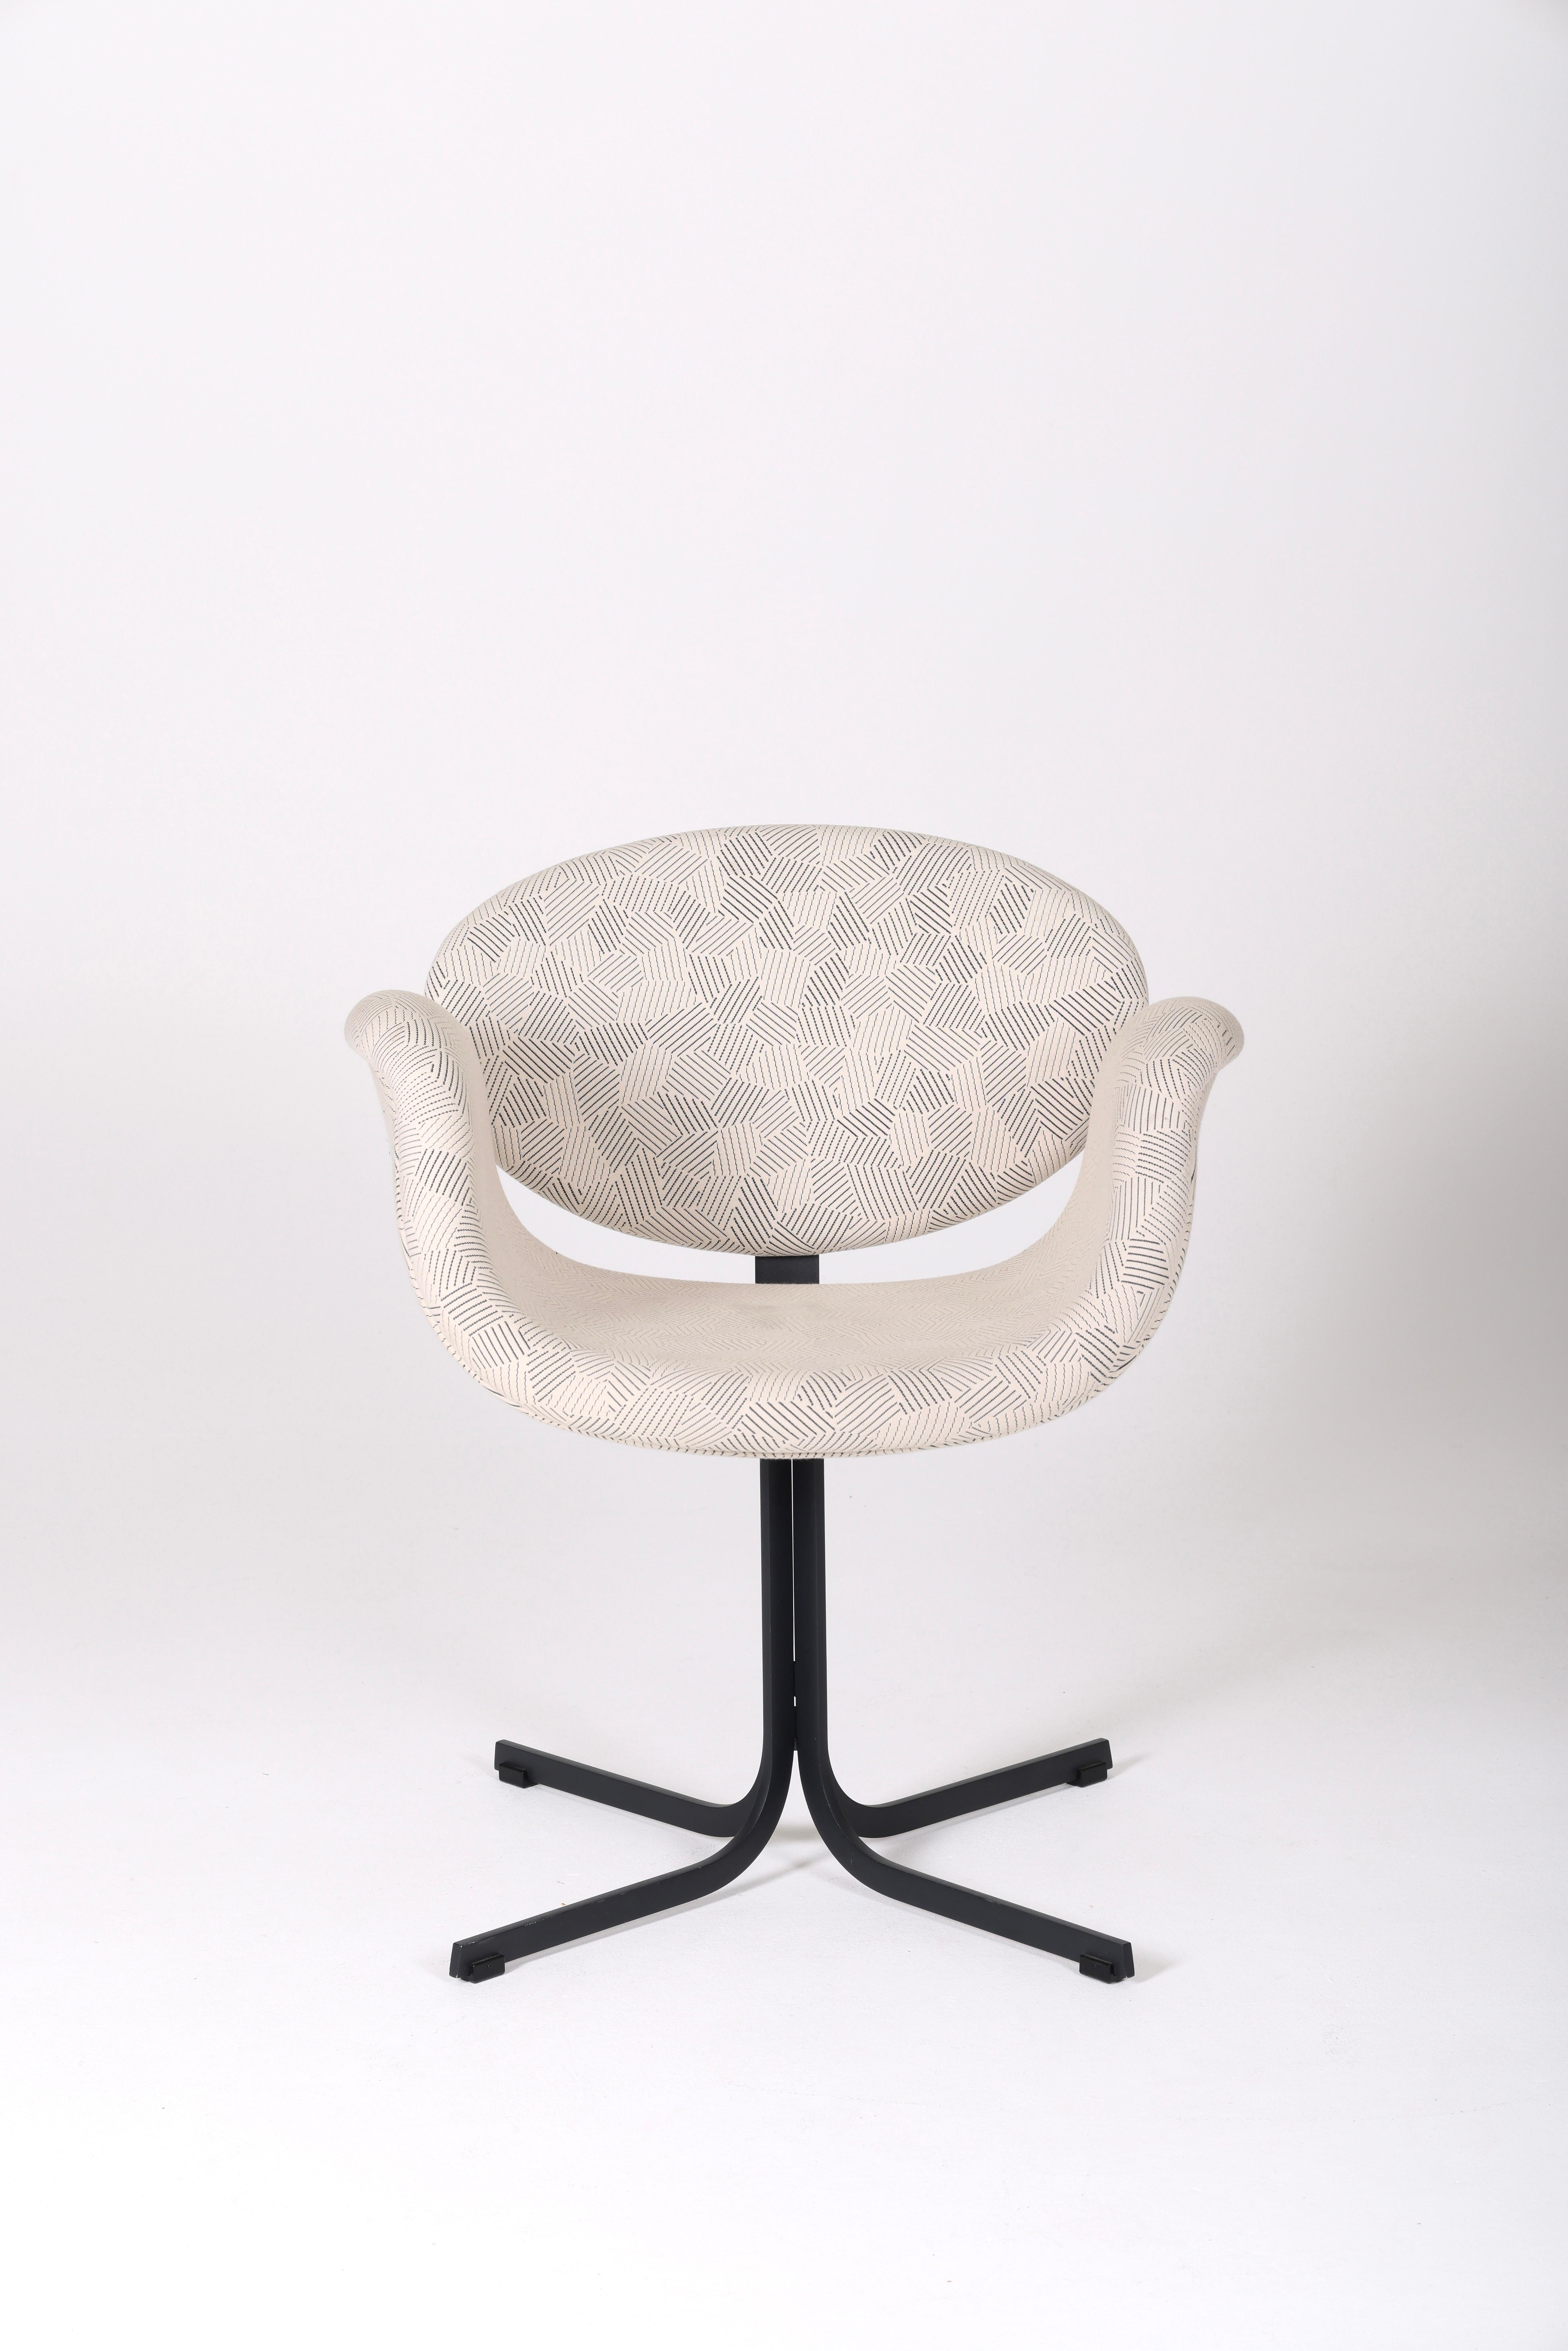 Tulip armchair designed by Pierre Paulin, published by Artifort in the 1960s. Black aluminum base, gray and white patterned fabric. In very good condition.
LP979.